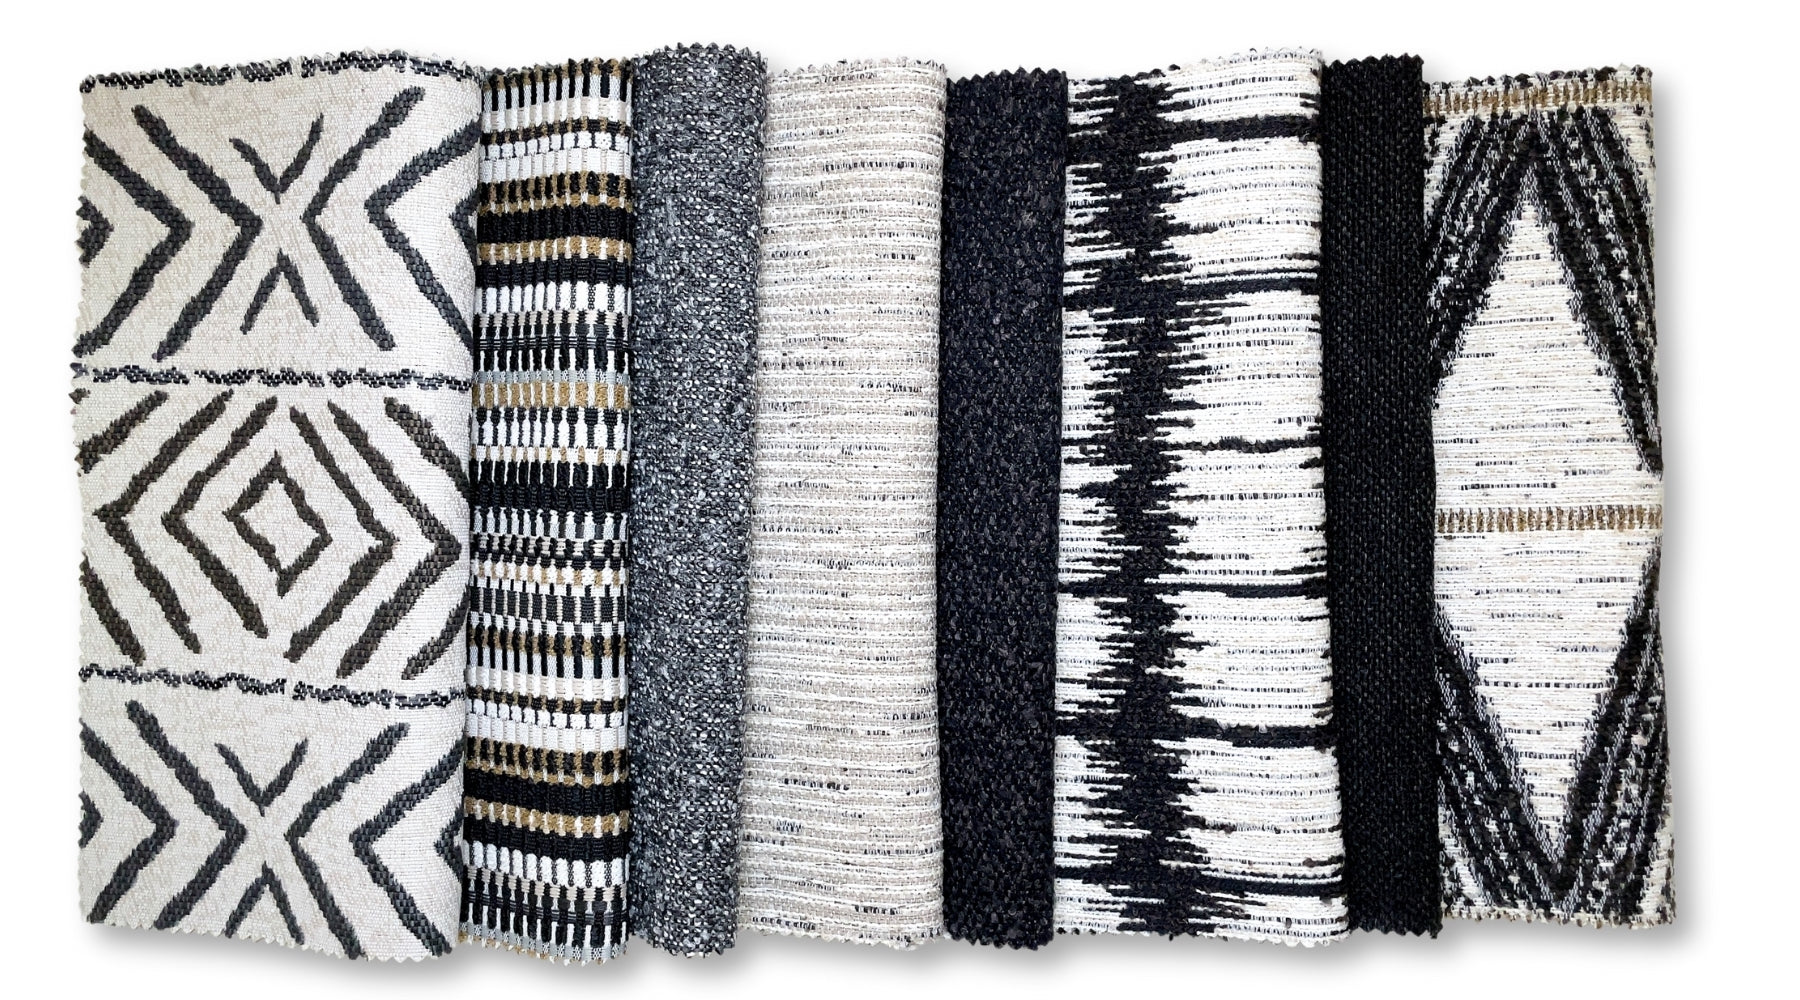 An array of fabric swatches showcasing a variety of textures and patterns in black, white, and gray tones. From left to right: a bold geometric pattern, a textured solid gray, a narrow stripe, a speckled tweed, a darker solid, a high-contrast ikat design, and a fabric featuring a tribal-inspired print with gold accents.